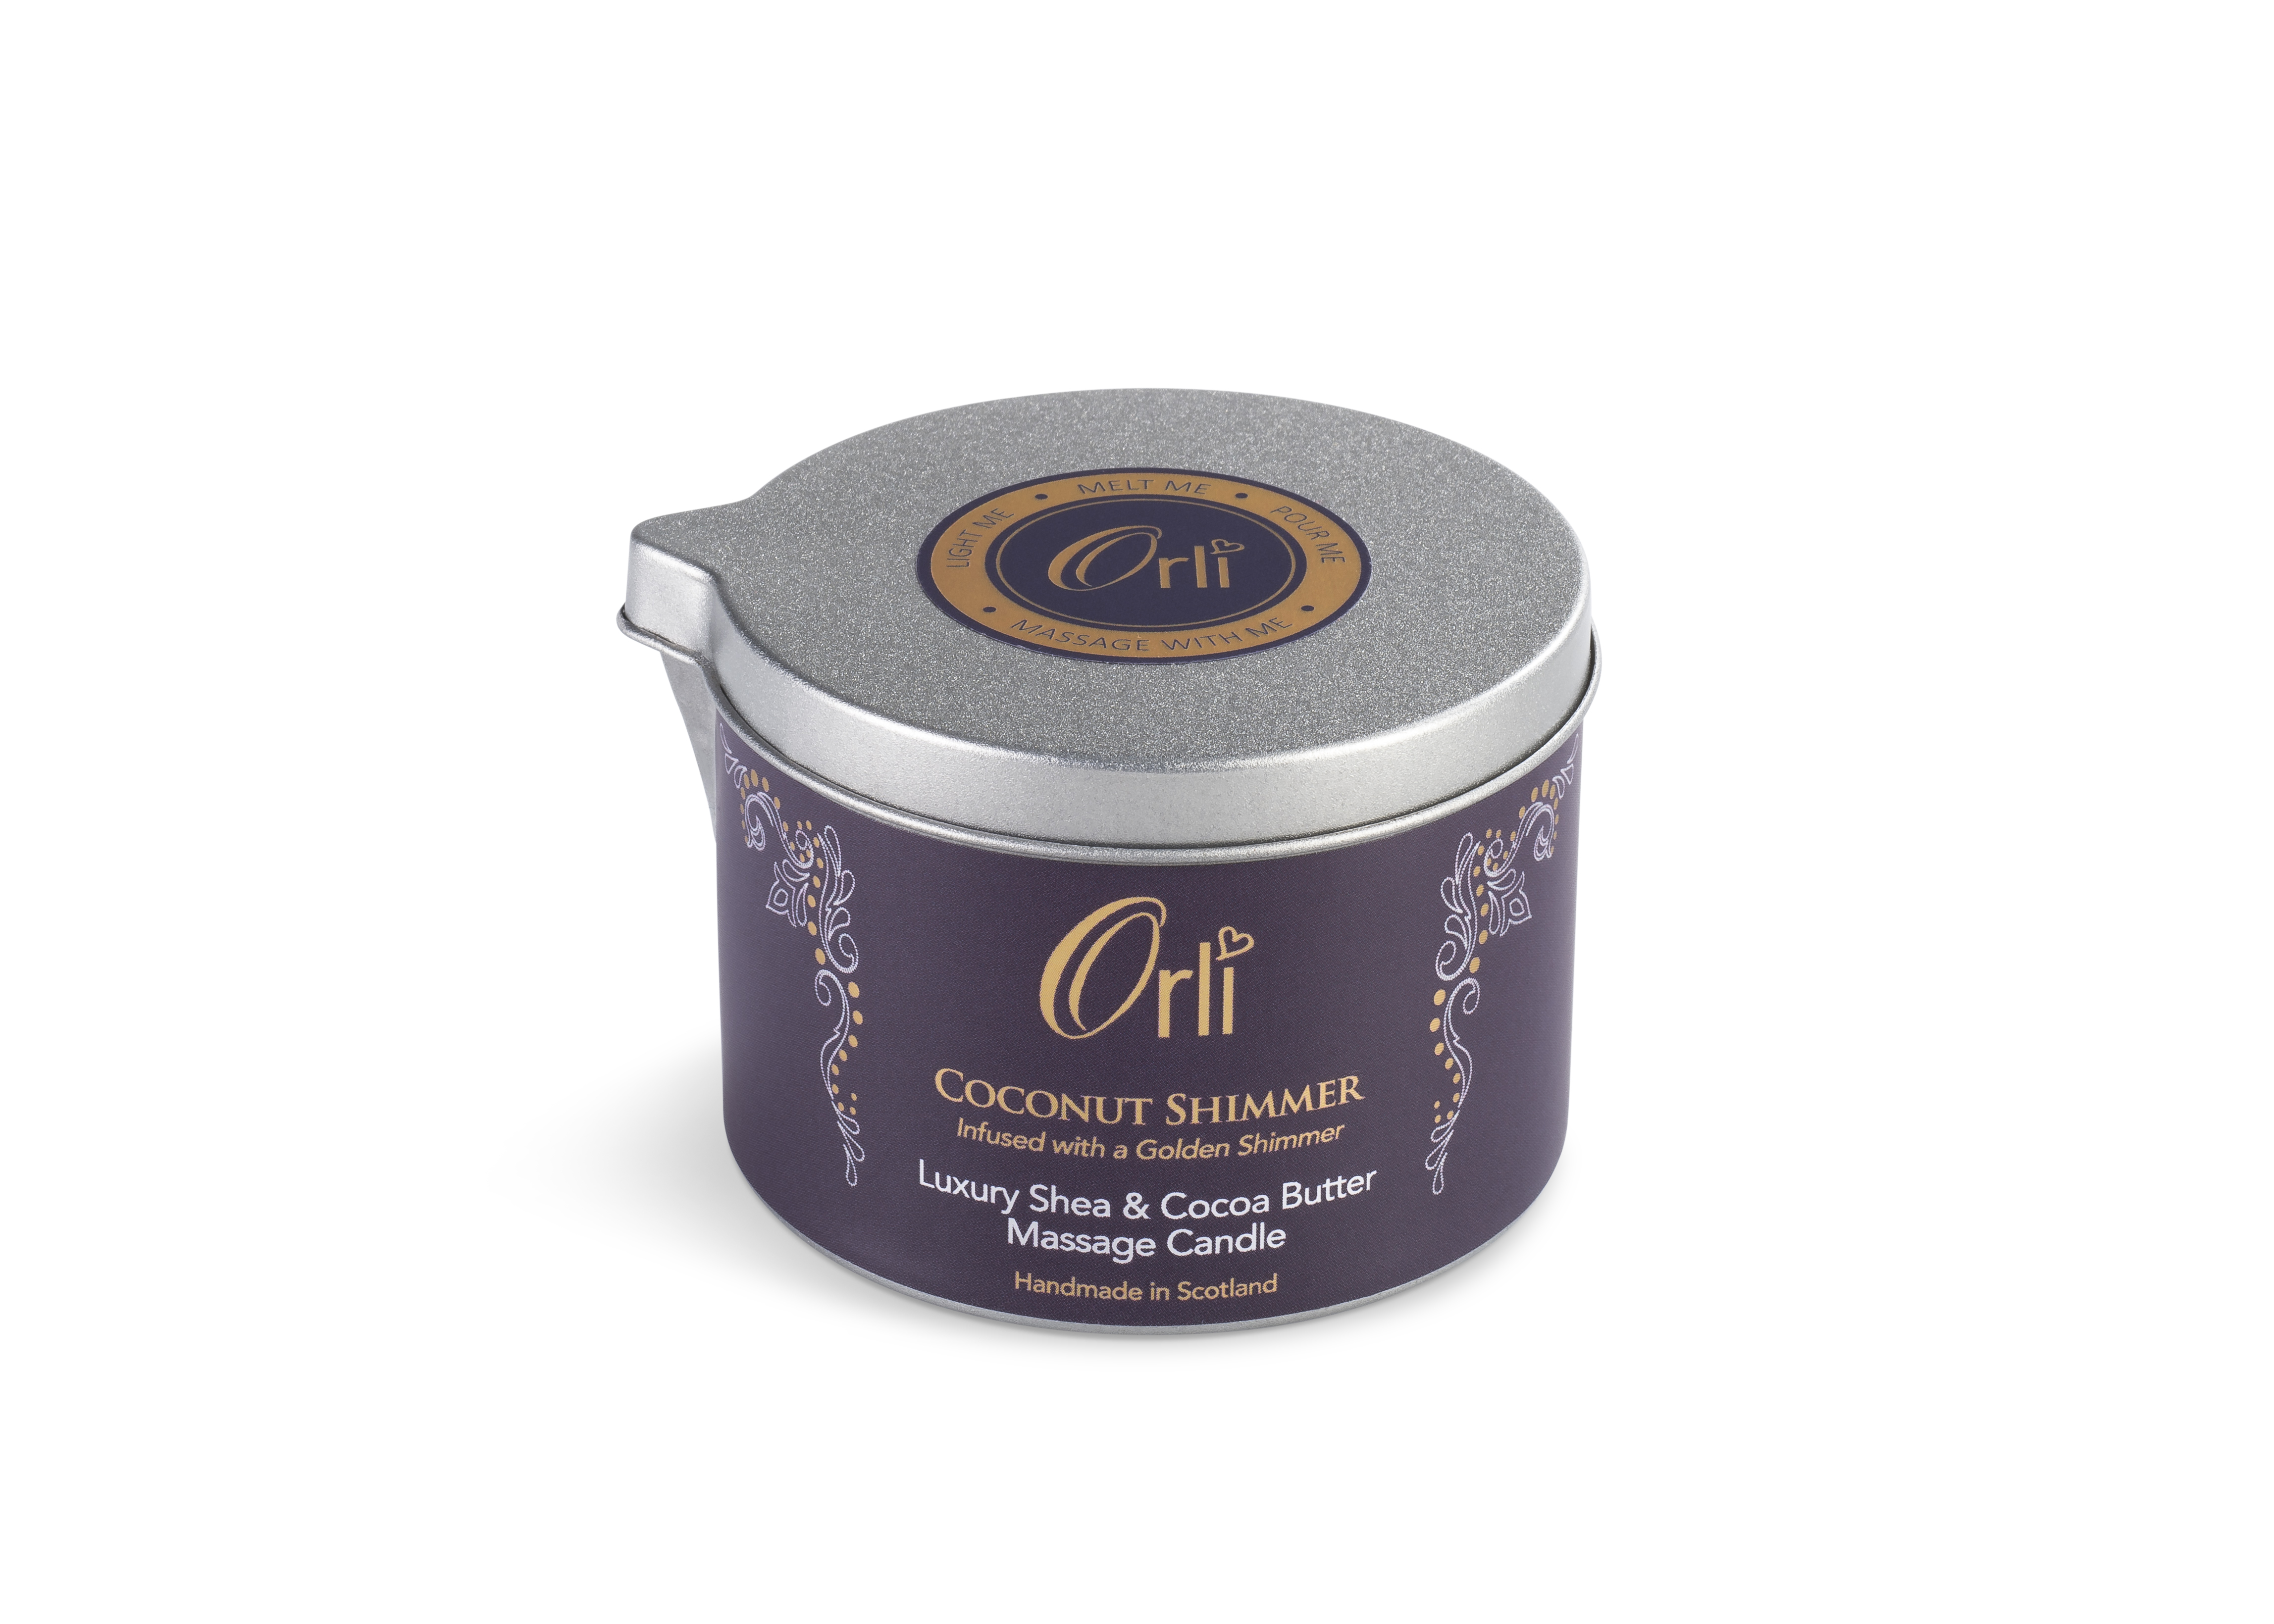 Coconut Shimmer Massage Candle by Orli